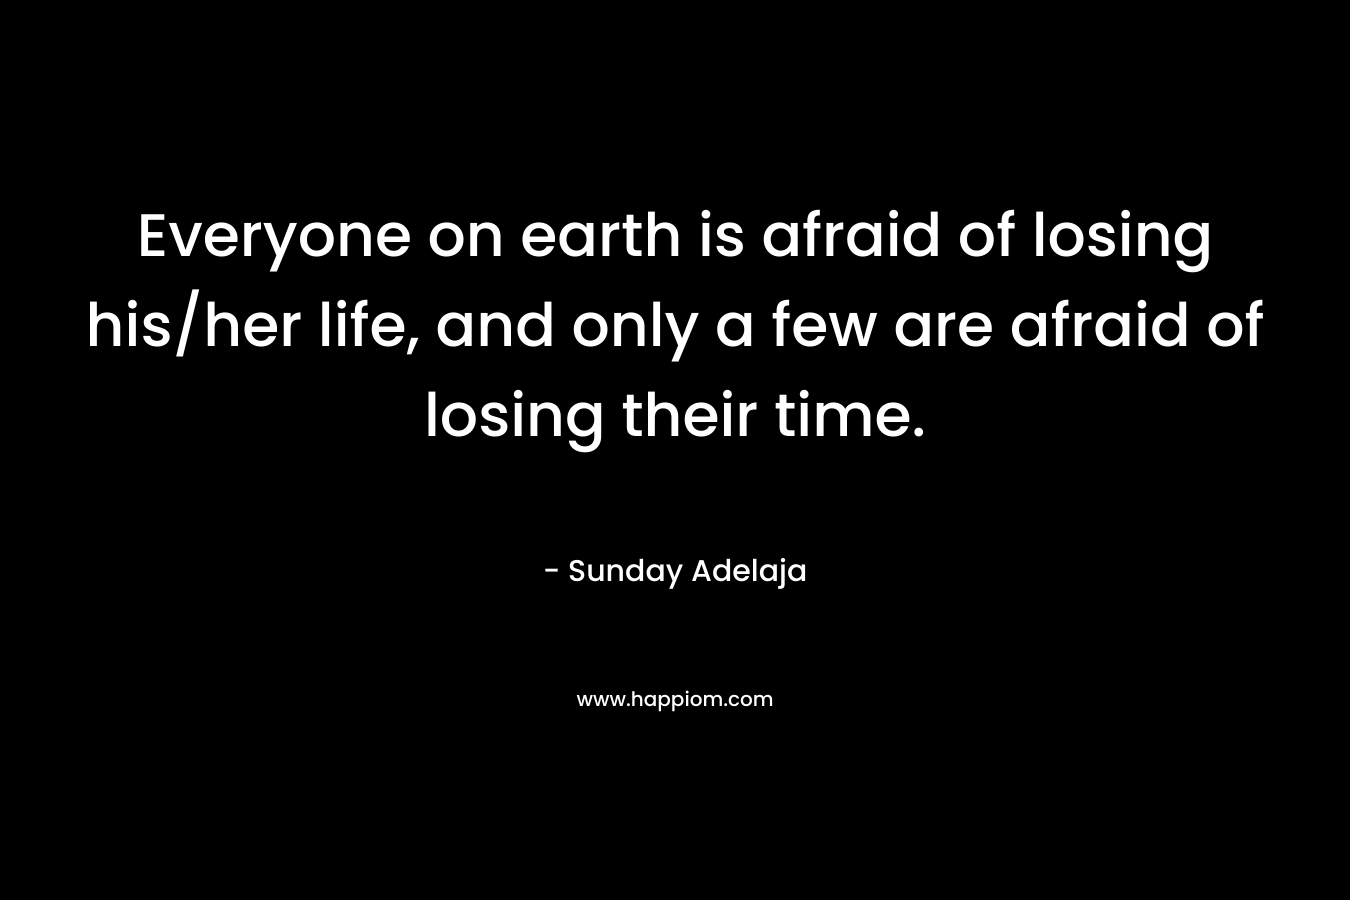 Everyone on earth is afraid of losing his/her life, and only a few are afraid of losing their time.